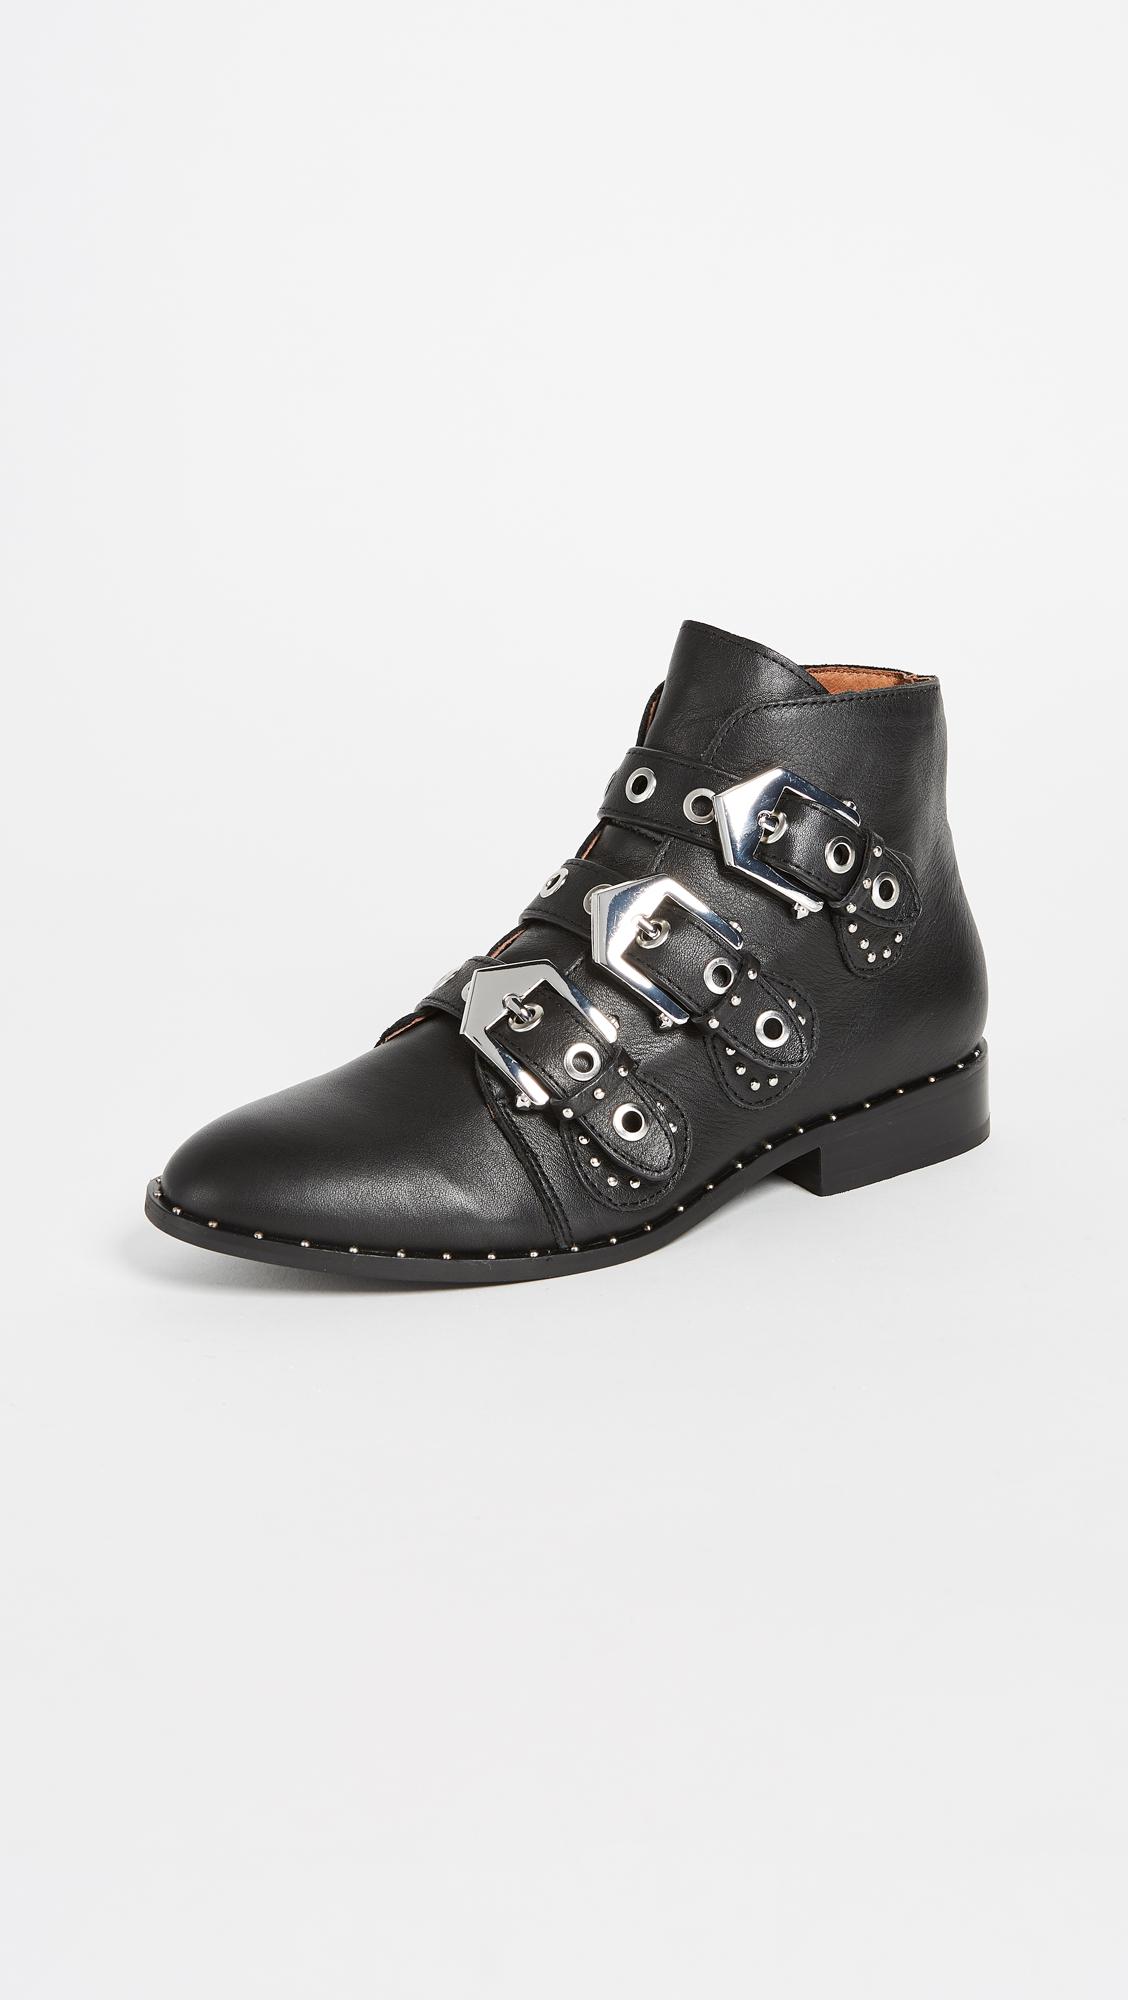 Sol Sana Leather Maxwell Boots in Black - Lyst